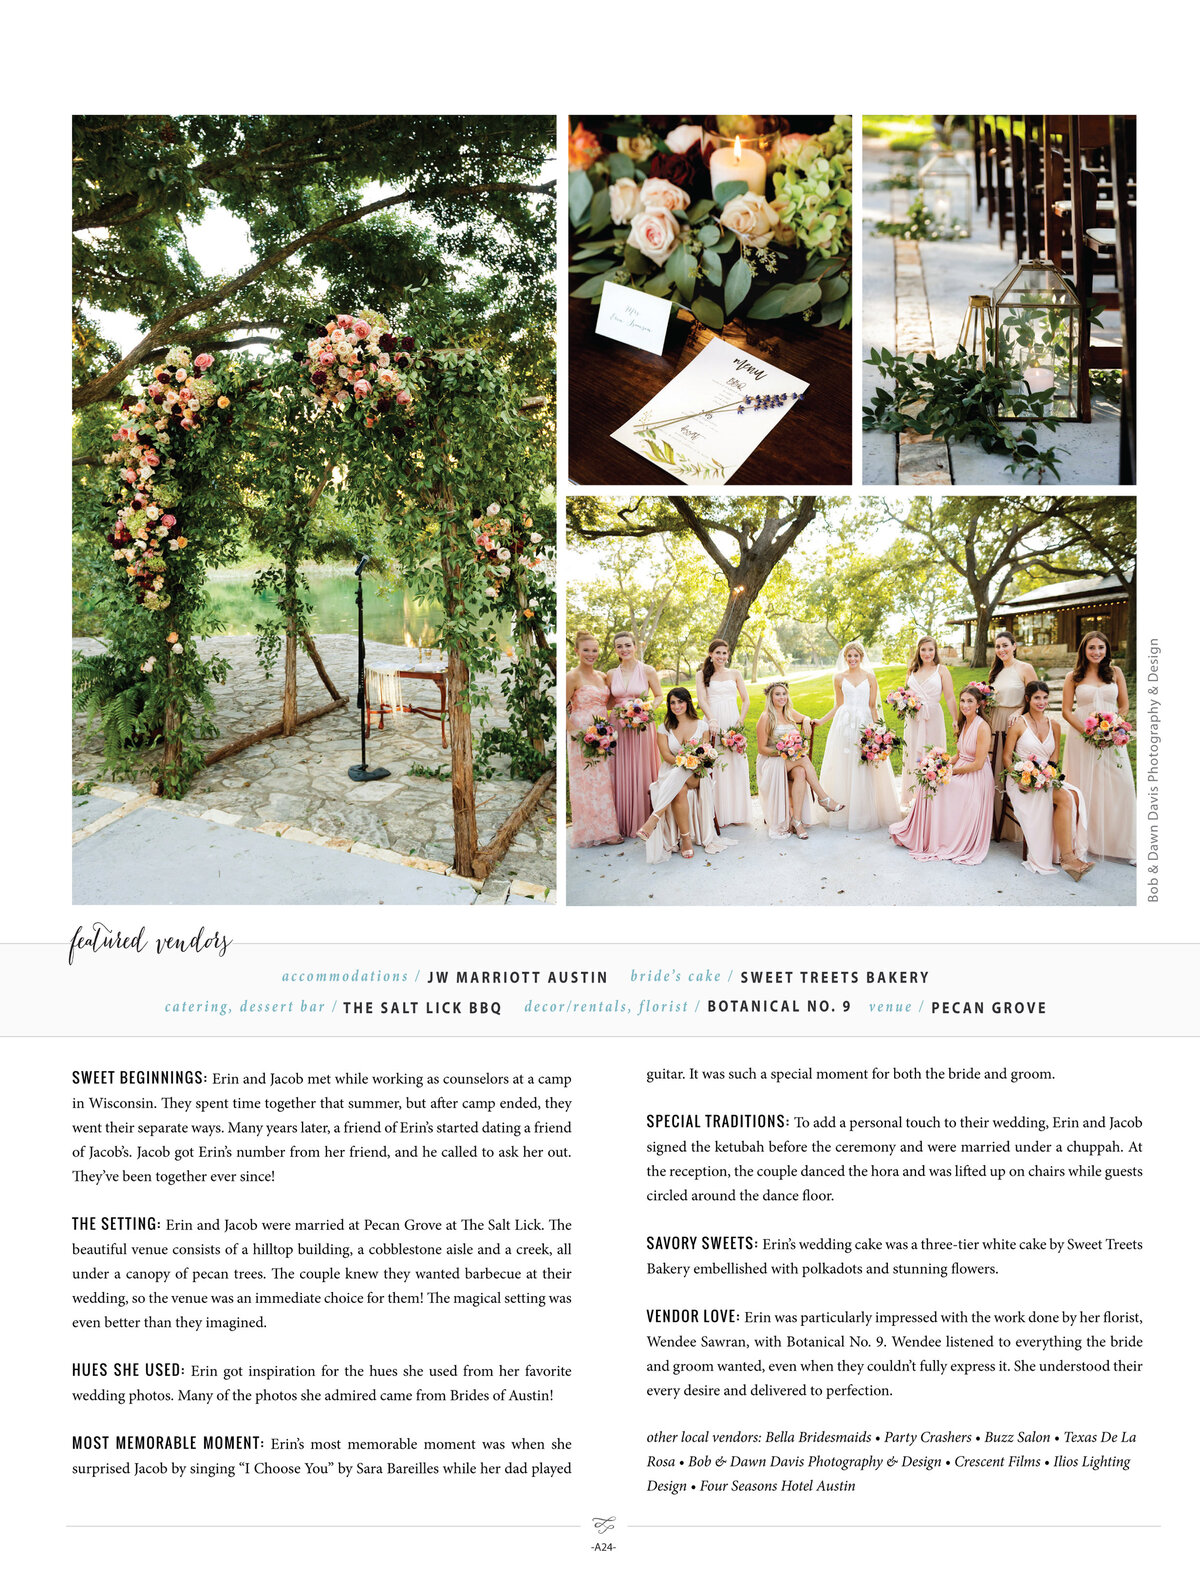 We absolutely love destination weddings and this one is no exception.  We are thrilled to see our couple, Erin and Jacob's wedding in the Spring/Summer 2017 edition of Brides of Austin magazine! It was a sweltering hot day in Austin and they were as cool as can be!  Thank you to Marcy Glink of Great Events who introduced us and planned this beautiful wedding. Click here for a list of vendors.